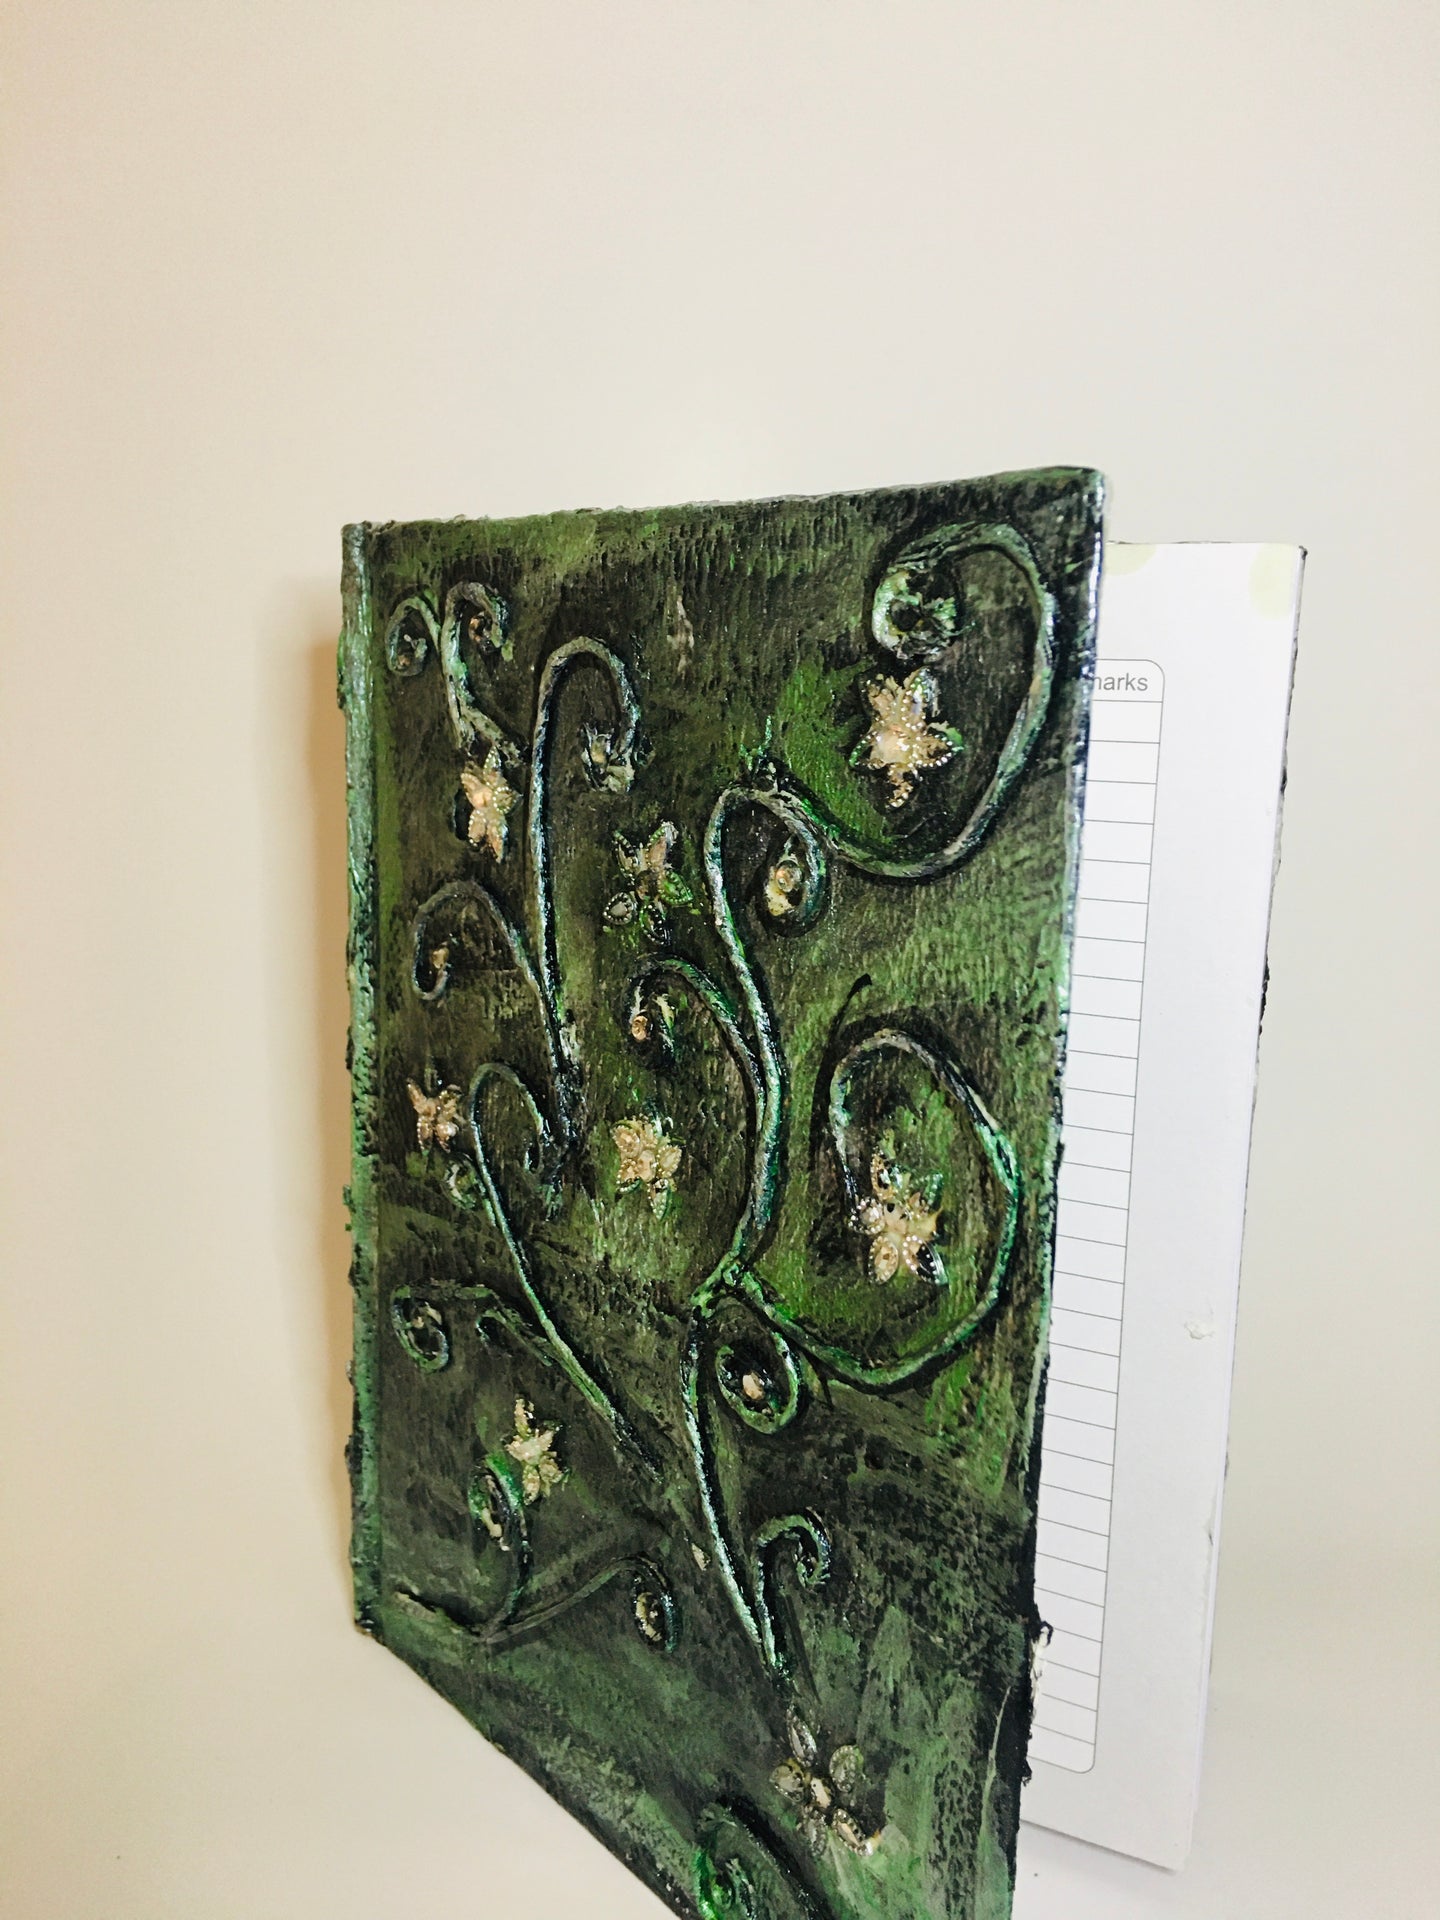 Journal / Personal Diary Hard Cover Hand Crafted with Waste Material